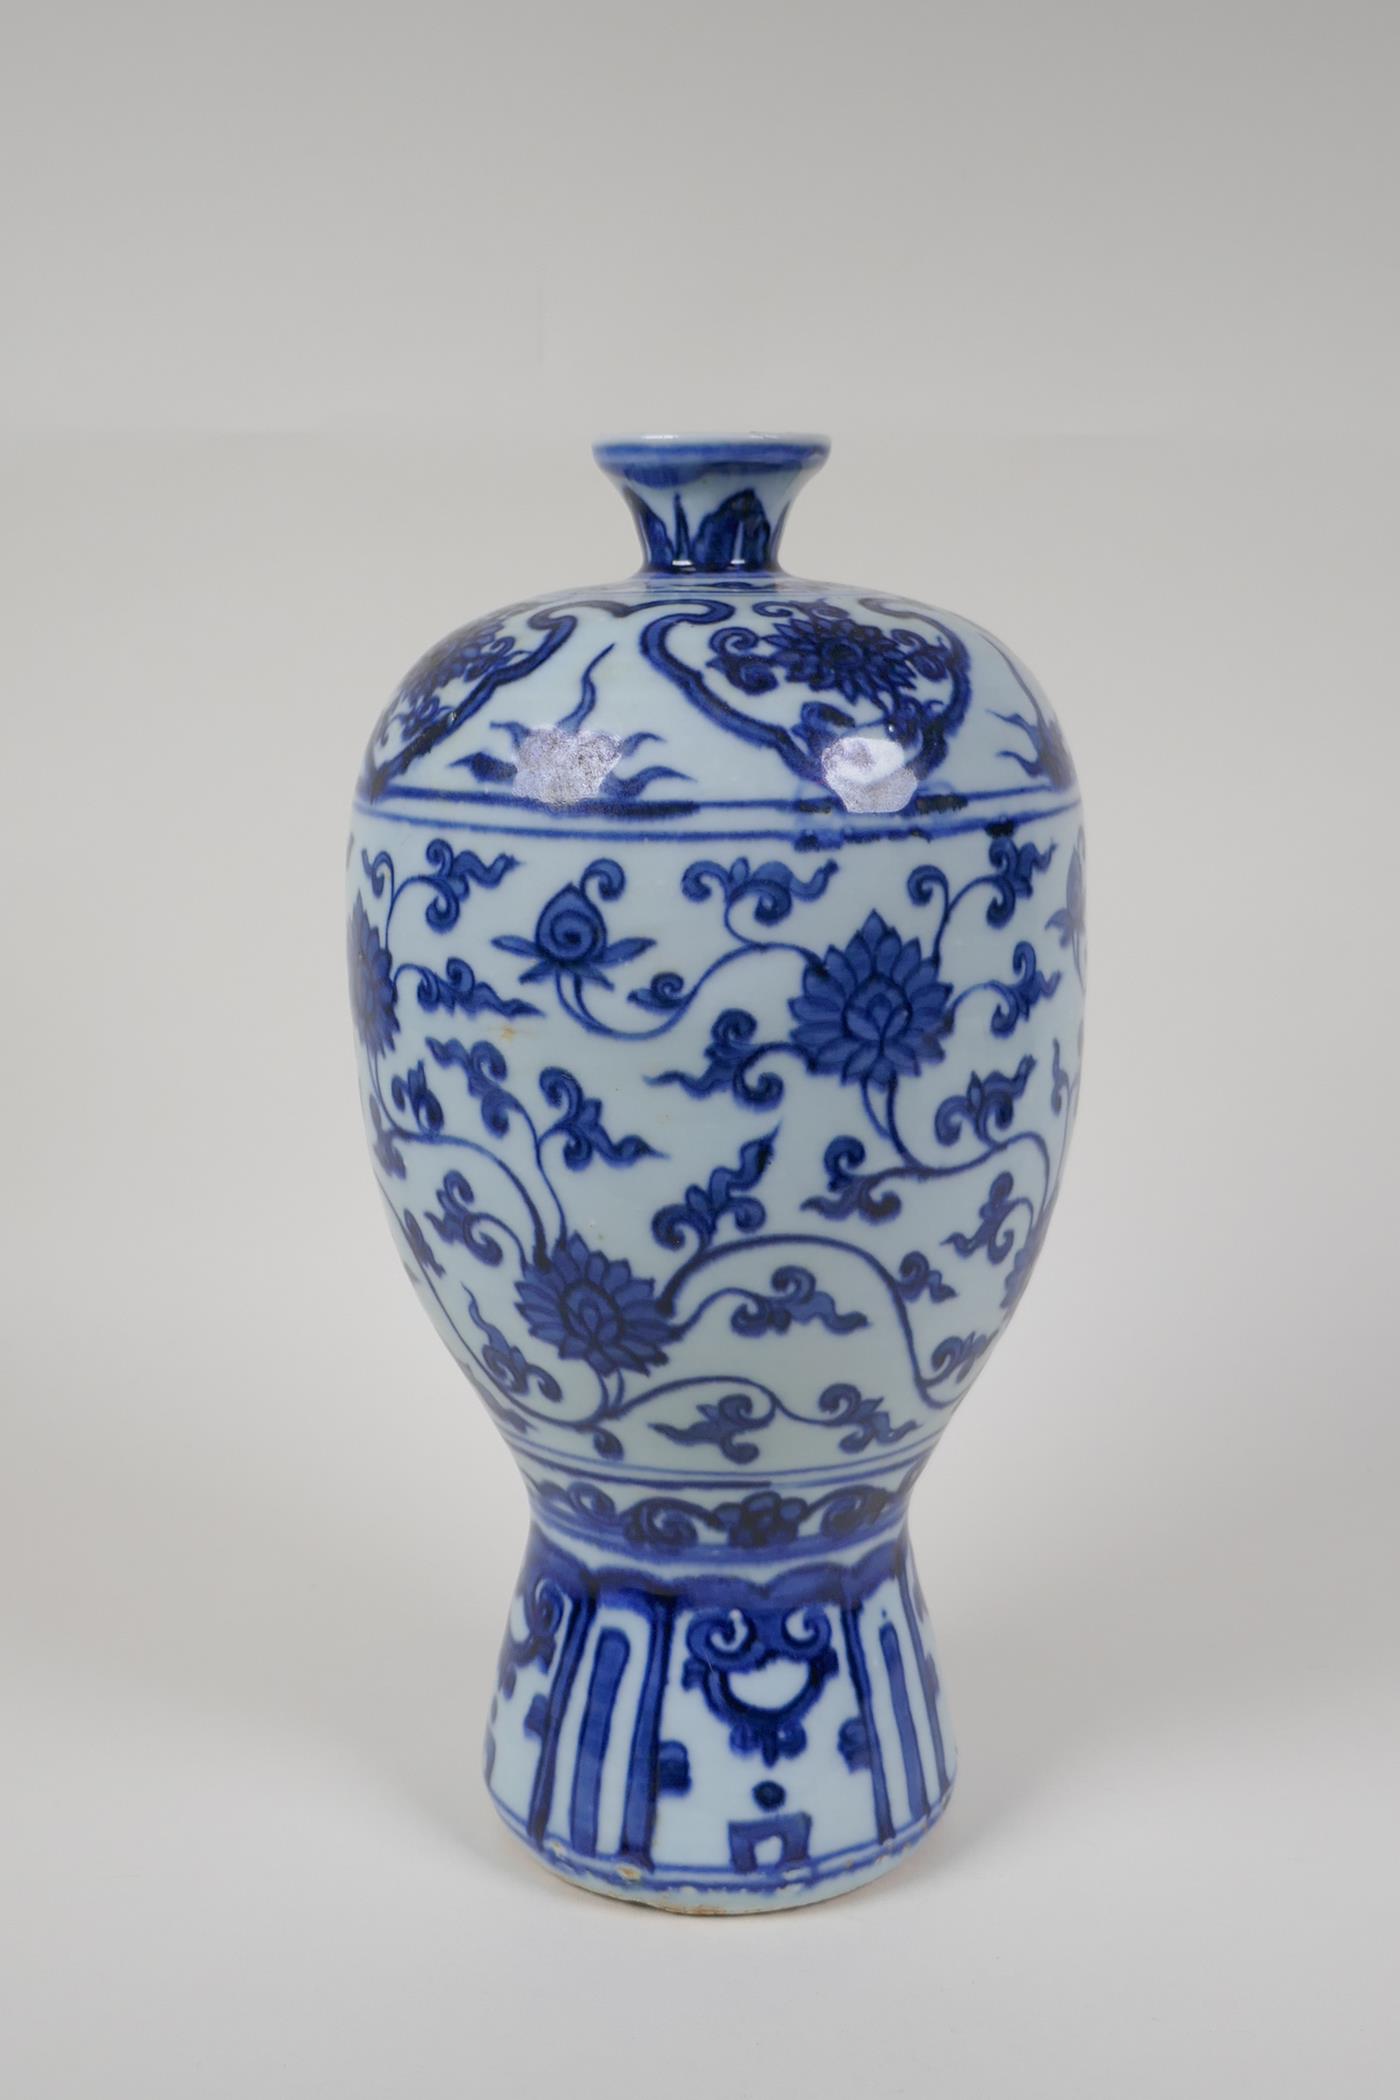 A Chinese ming style blue and white porcelain vase with scrolling lotus flower pattern, 11½" high - Image 5 of 8